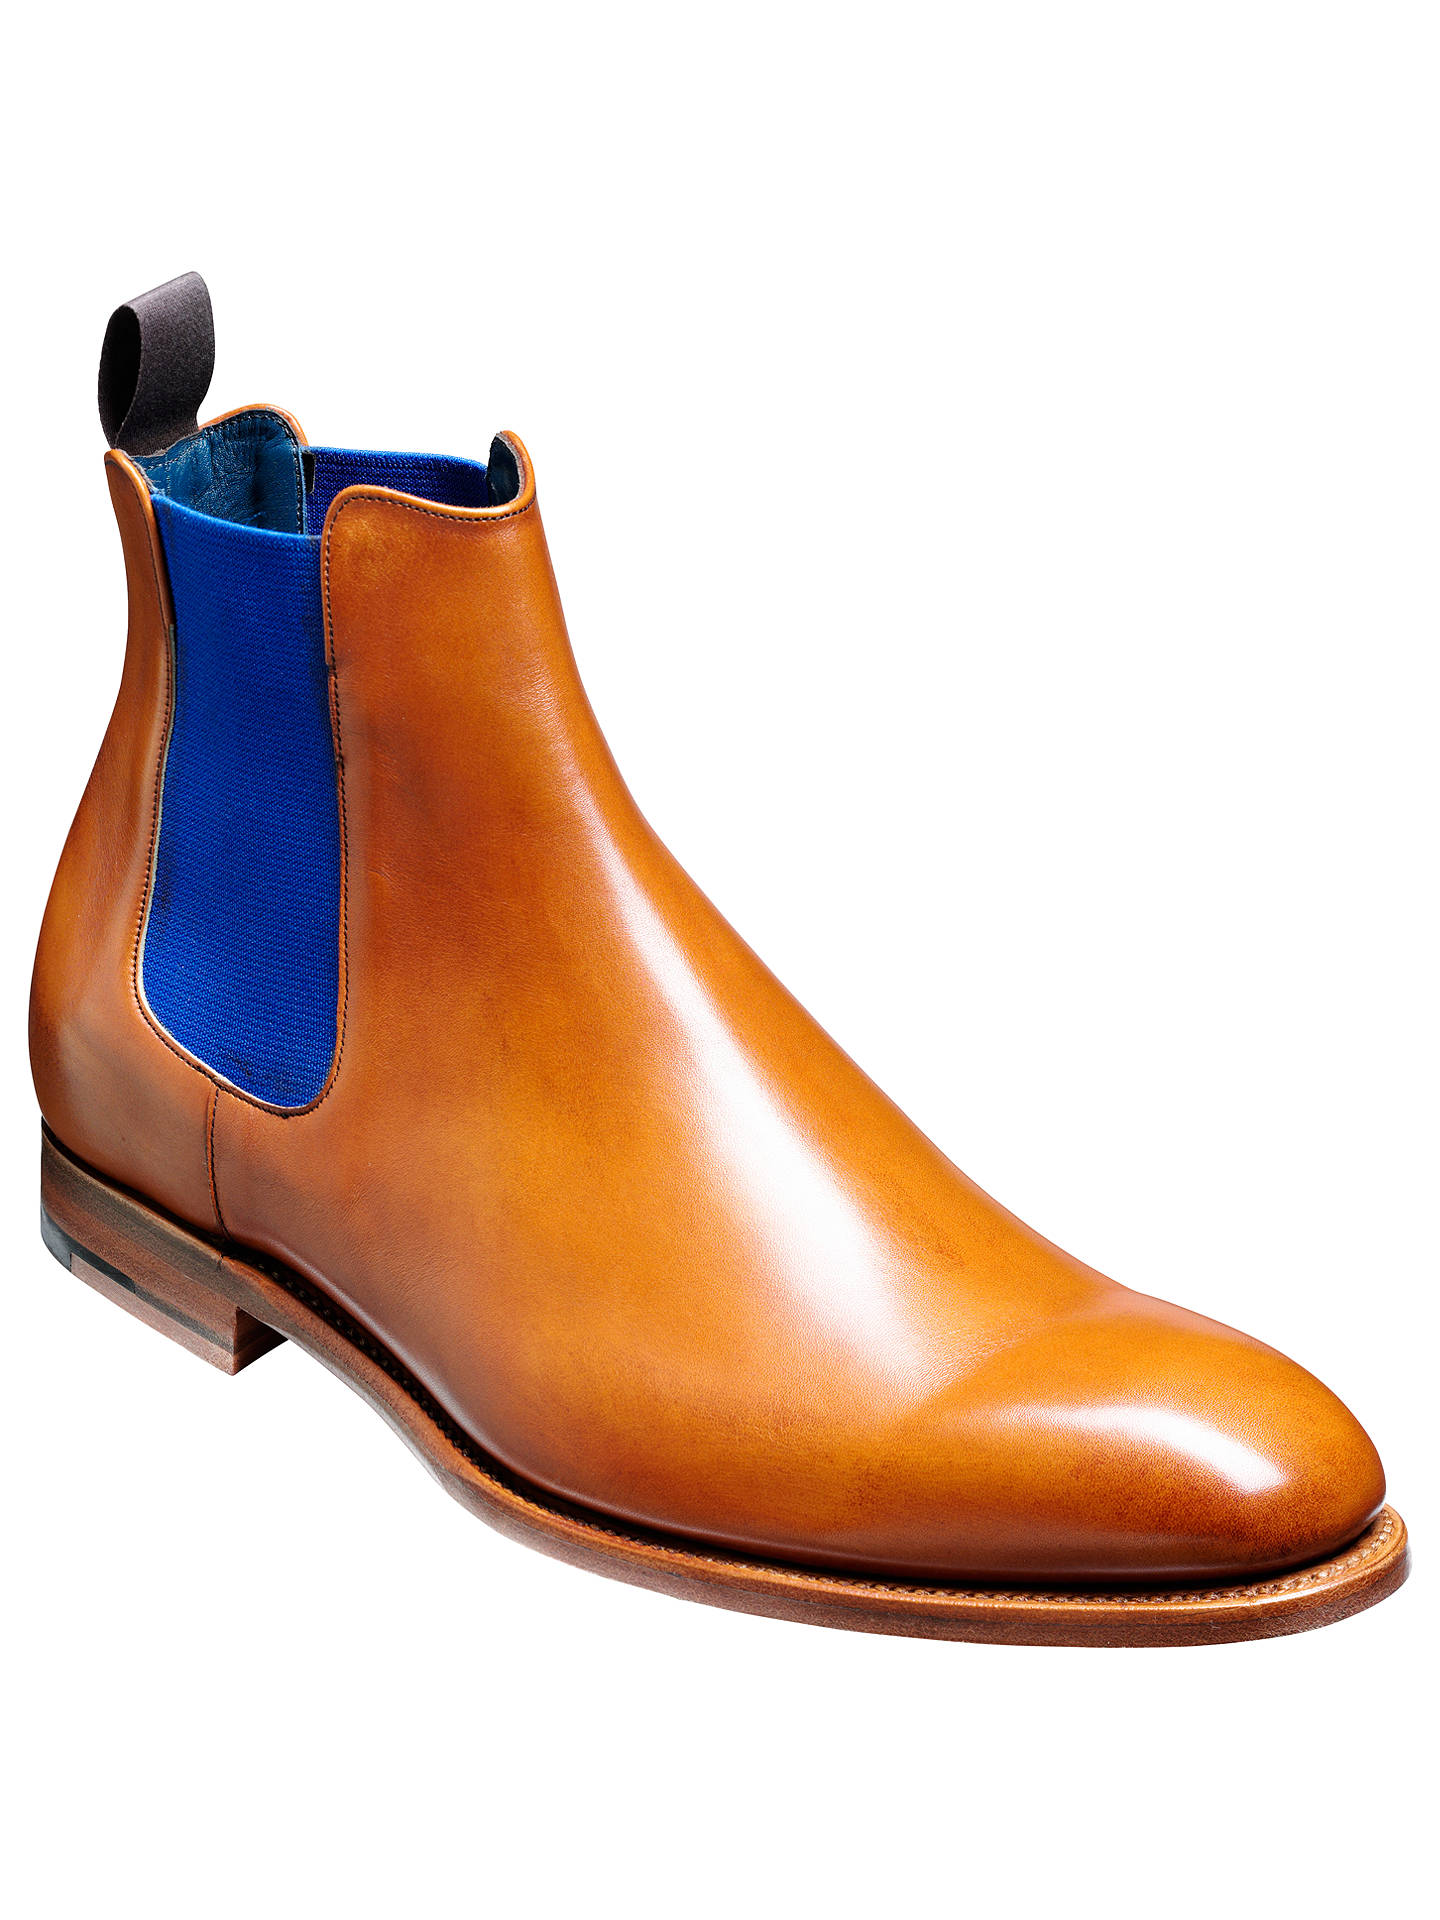 Barkers Hopper Leather Chelsea Boots, Cedar at John Lewis & Partners